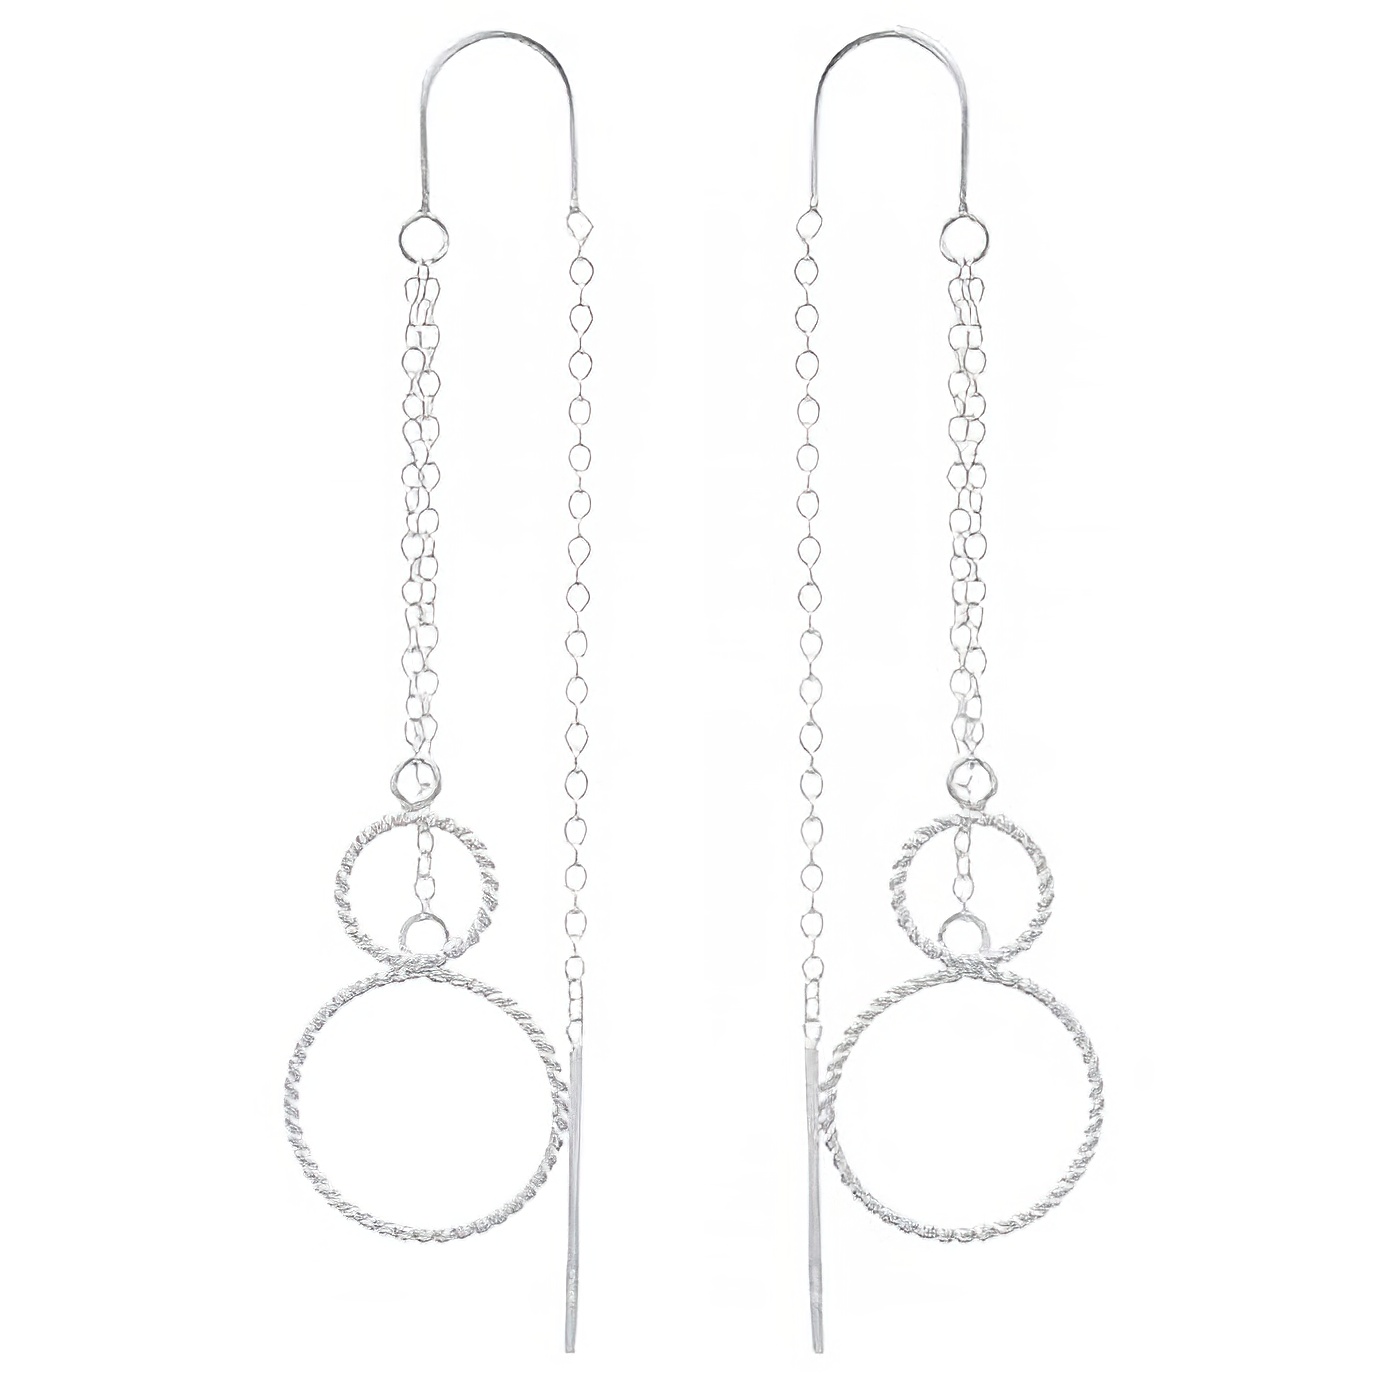 Dangling Circles On Sterling Silver Chain Threader Earrings by BeYindi 